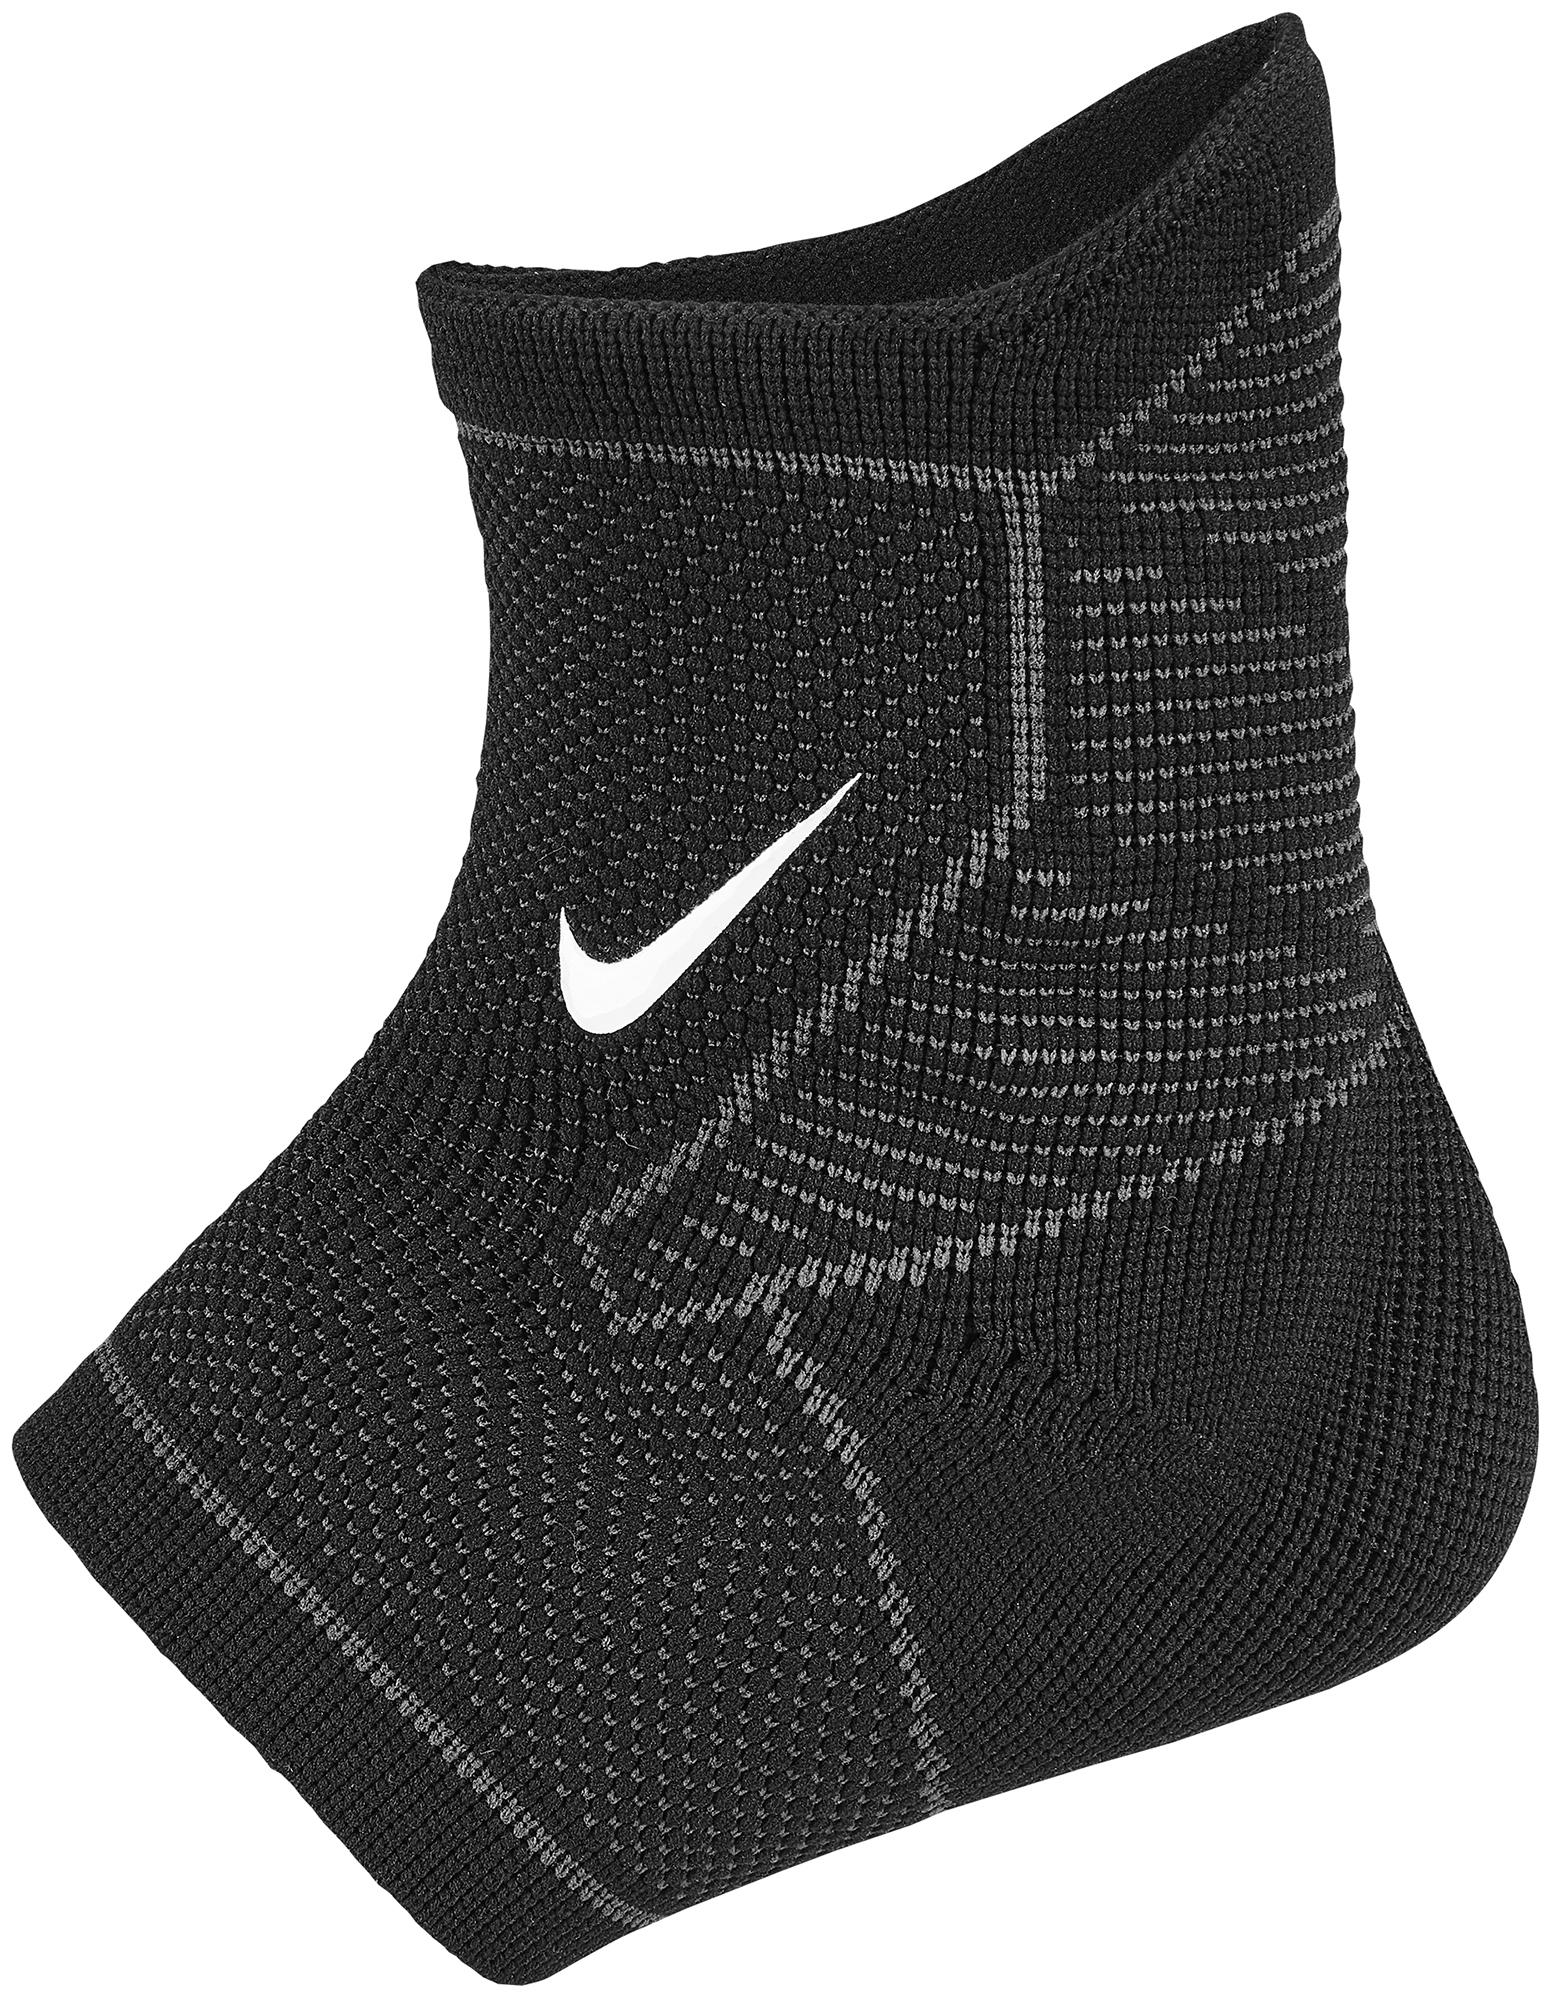 Nike Pro Knitted Ankle Sleeve - Black/anthracite/white